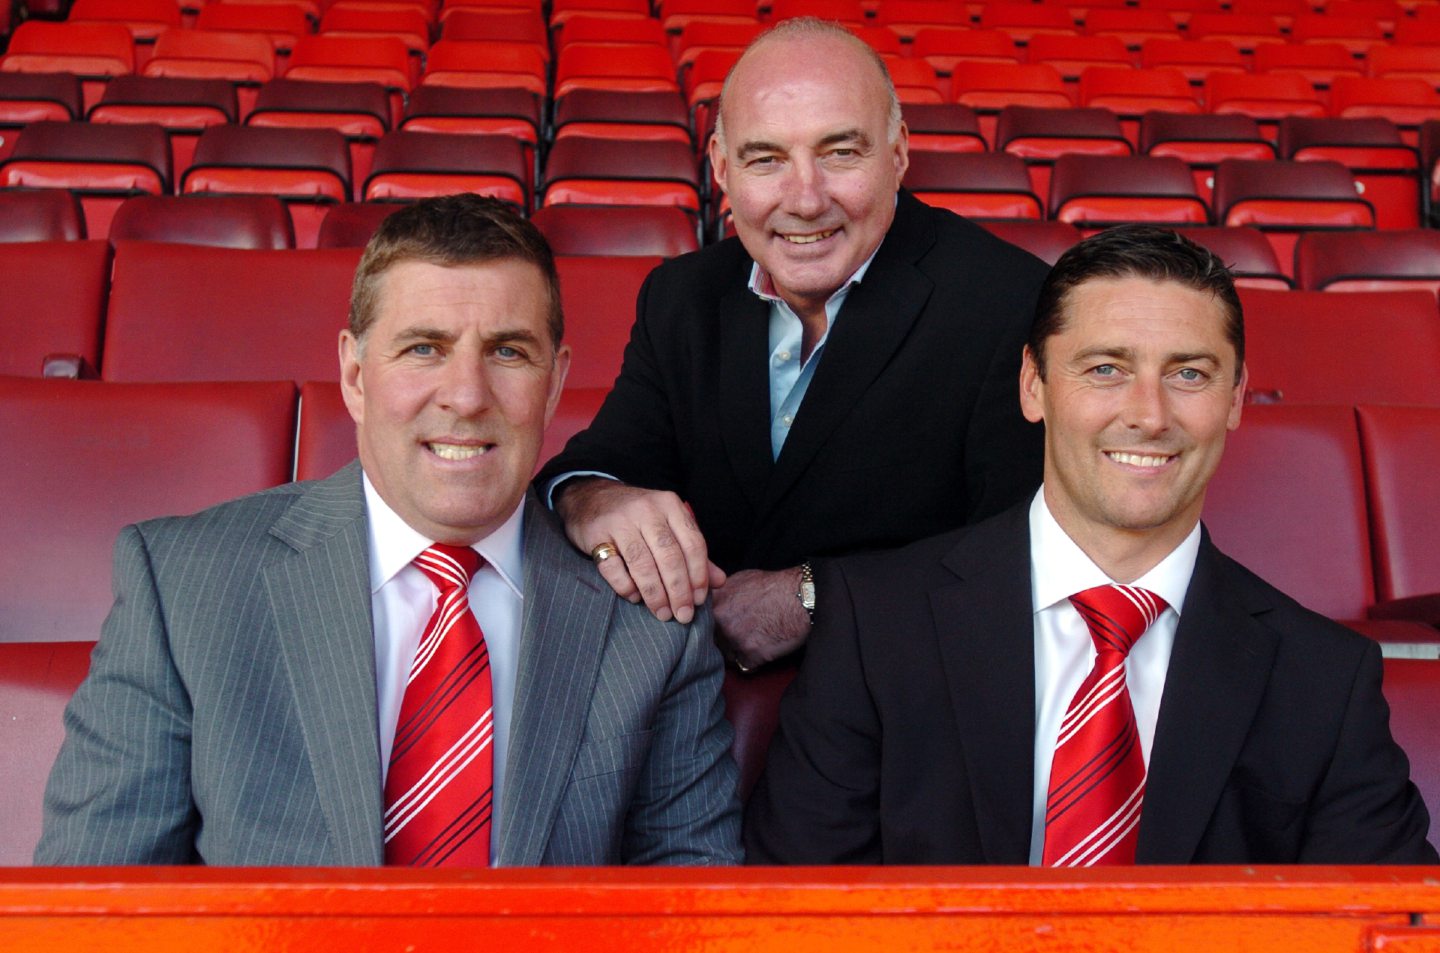 Willie Miller with the new Dons management team Mark McGhee (left) and his assistant Scott Leitch.